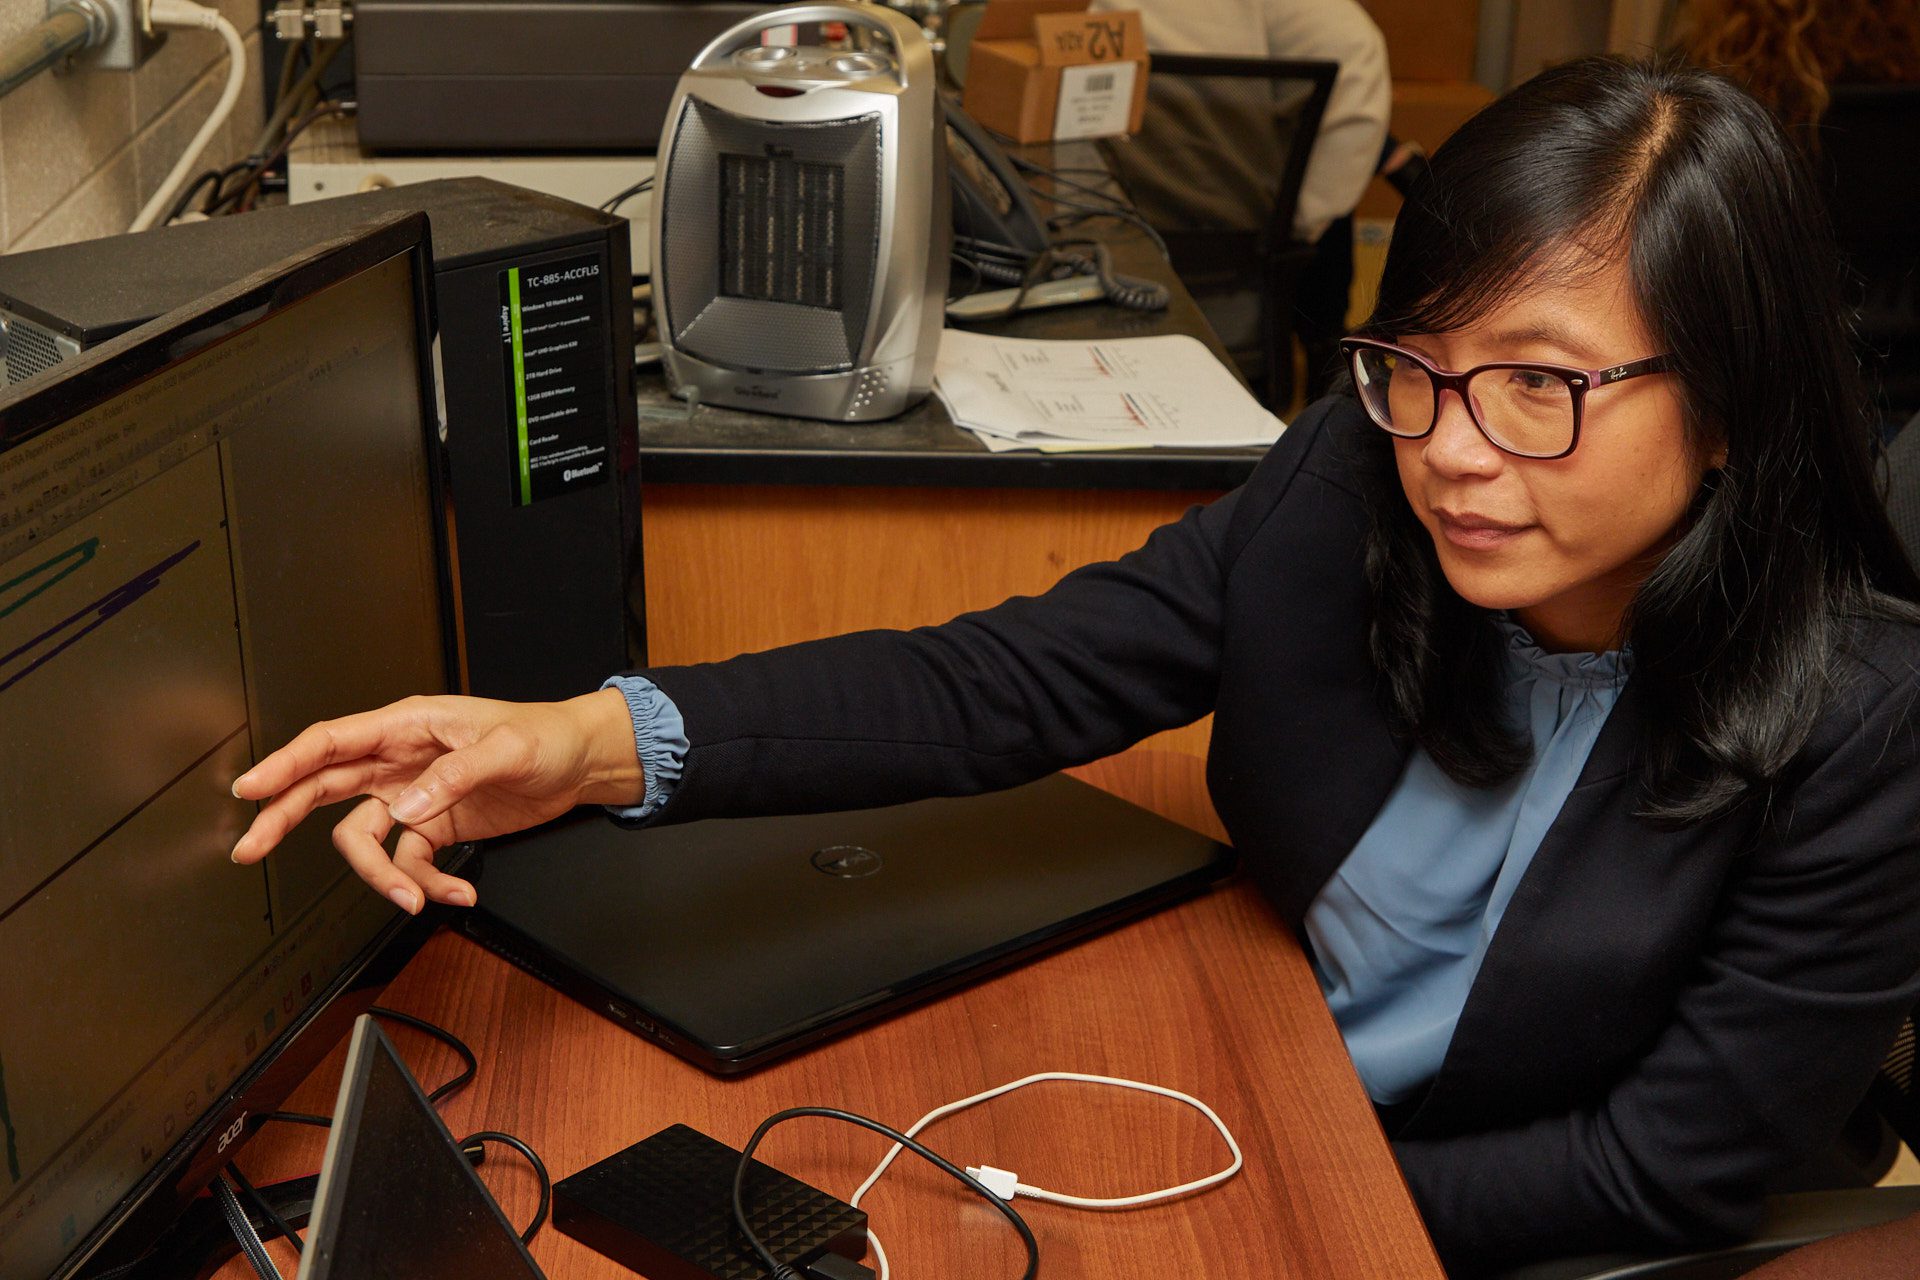 Woman wearing glasses and a black suit points at a computer screen.